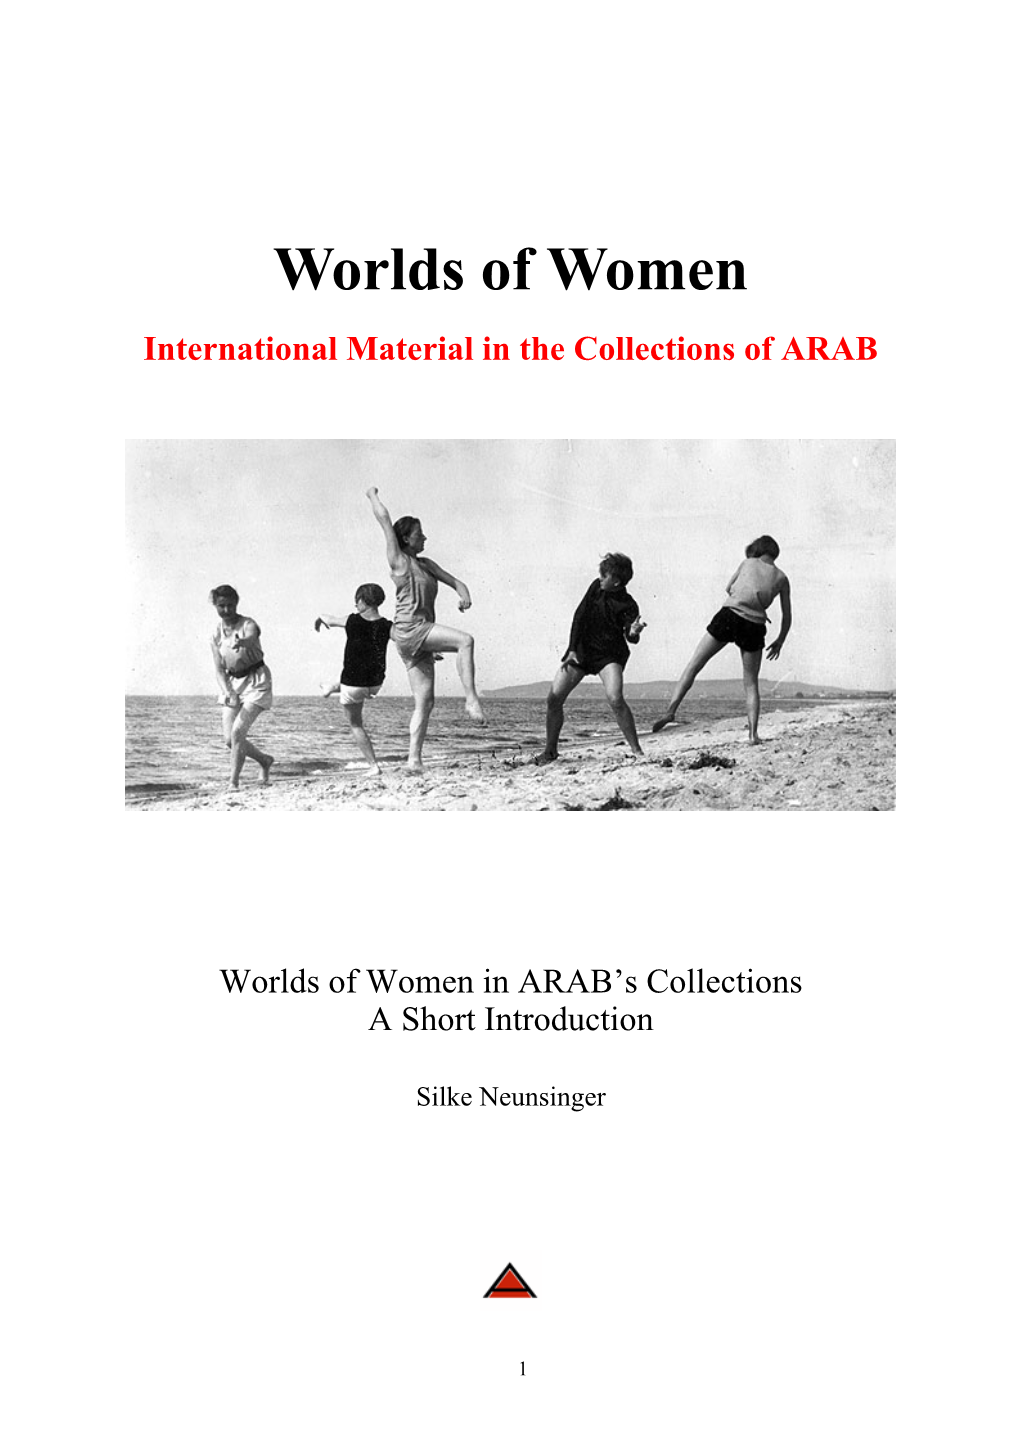 Worlds of Women in ARAB's Collections — a Short Introduction